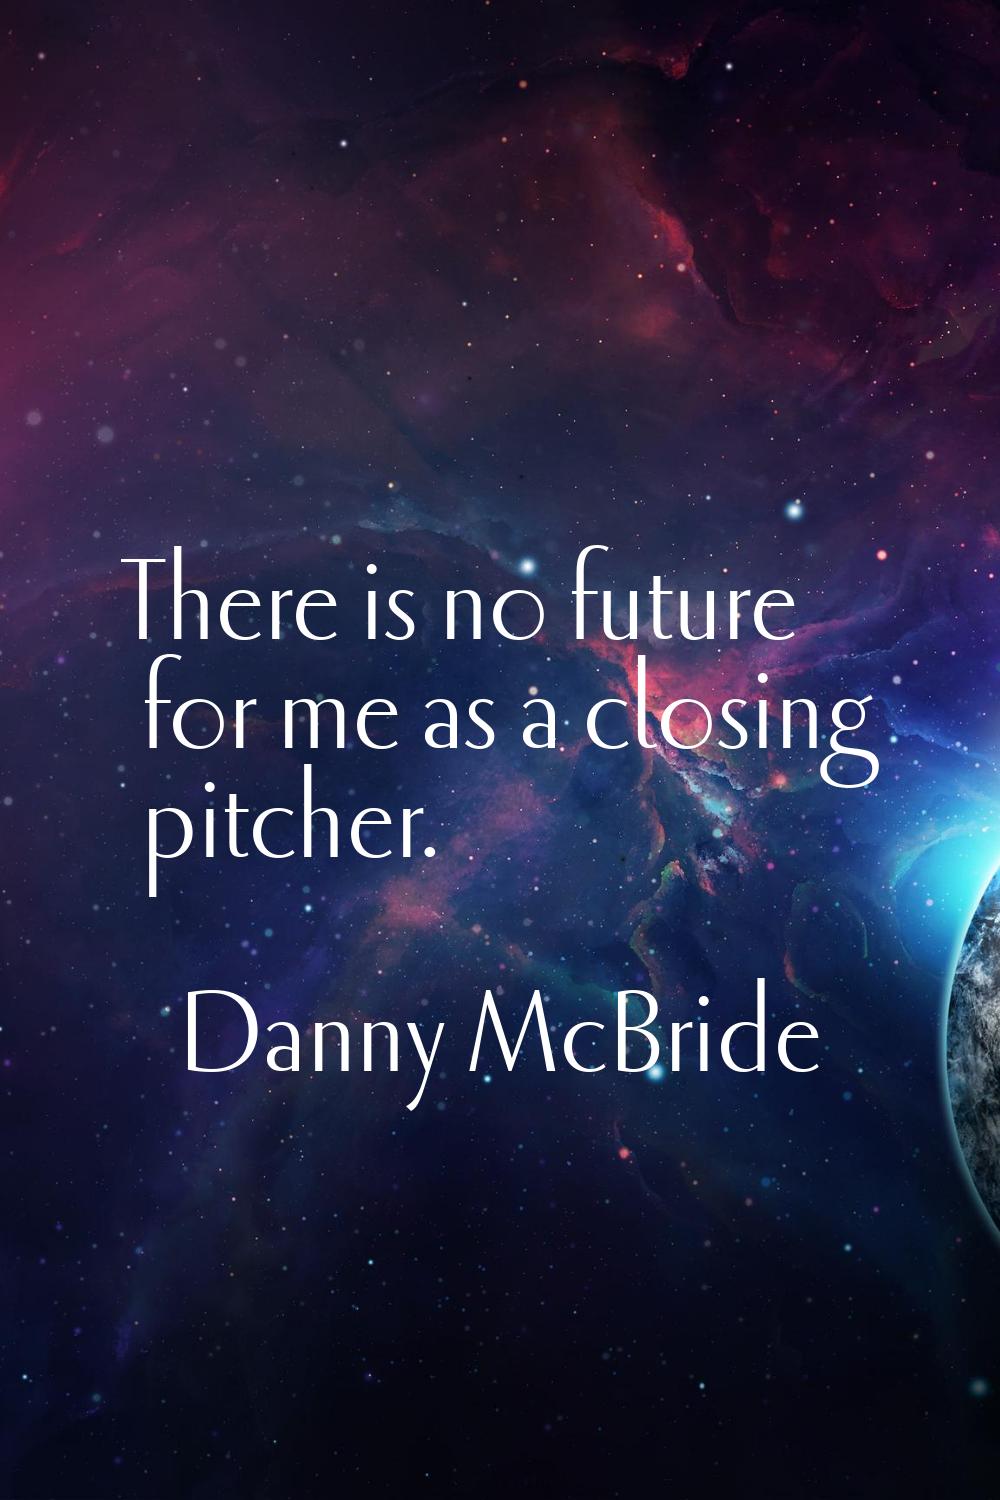 There is no future for me as a closing pitcher.